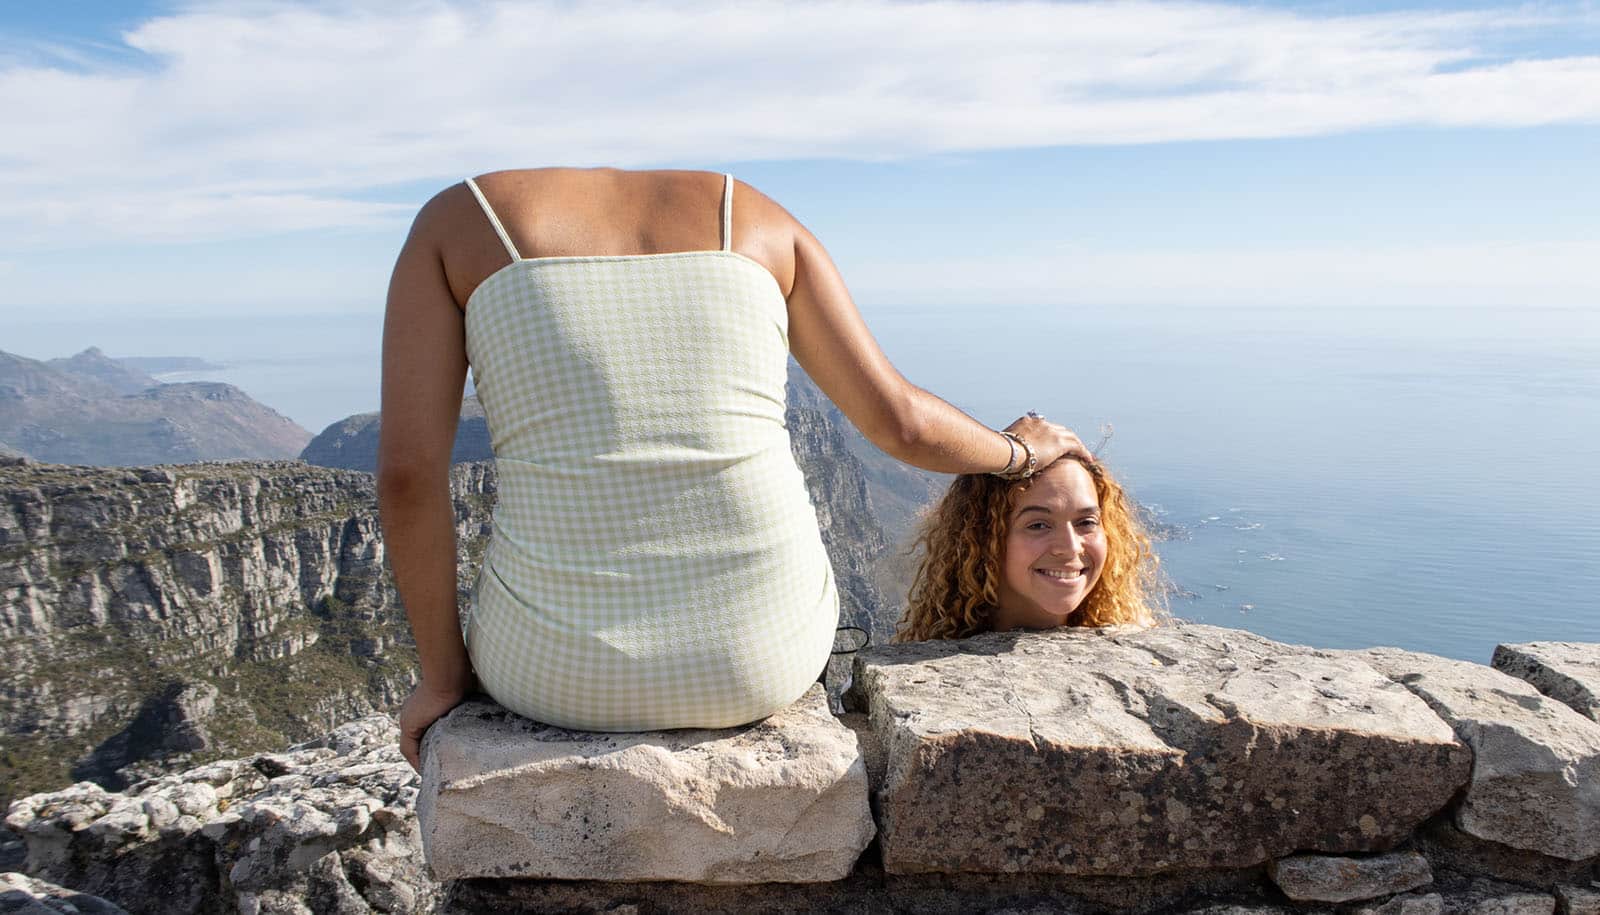 trick pose suggests person sits on ledge holding head beside them